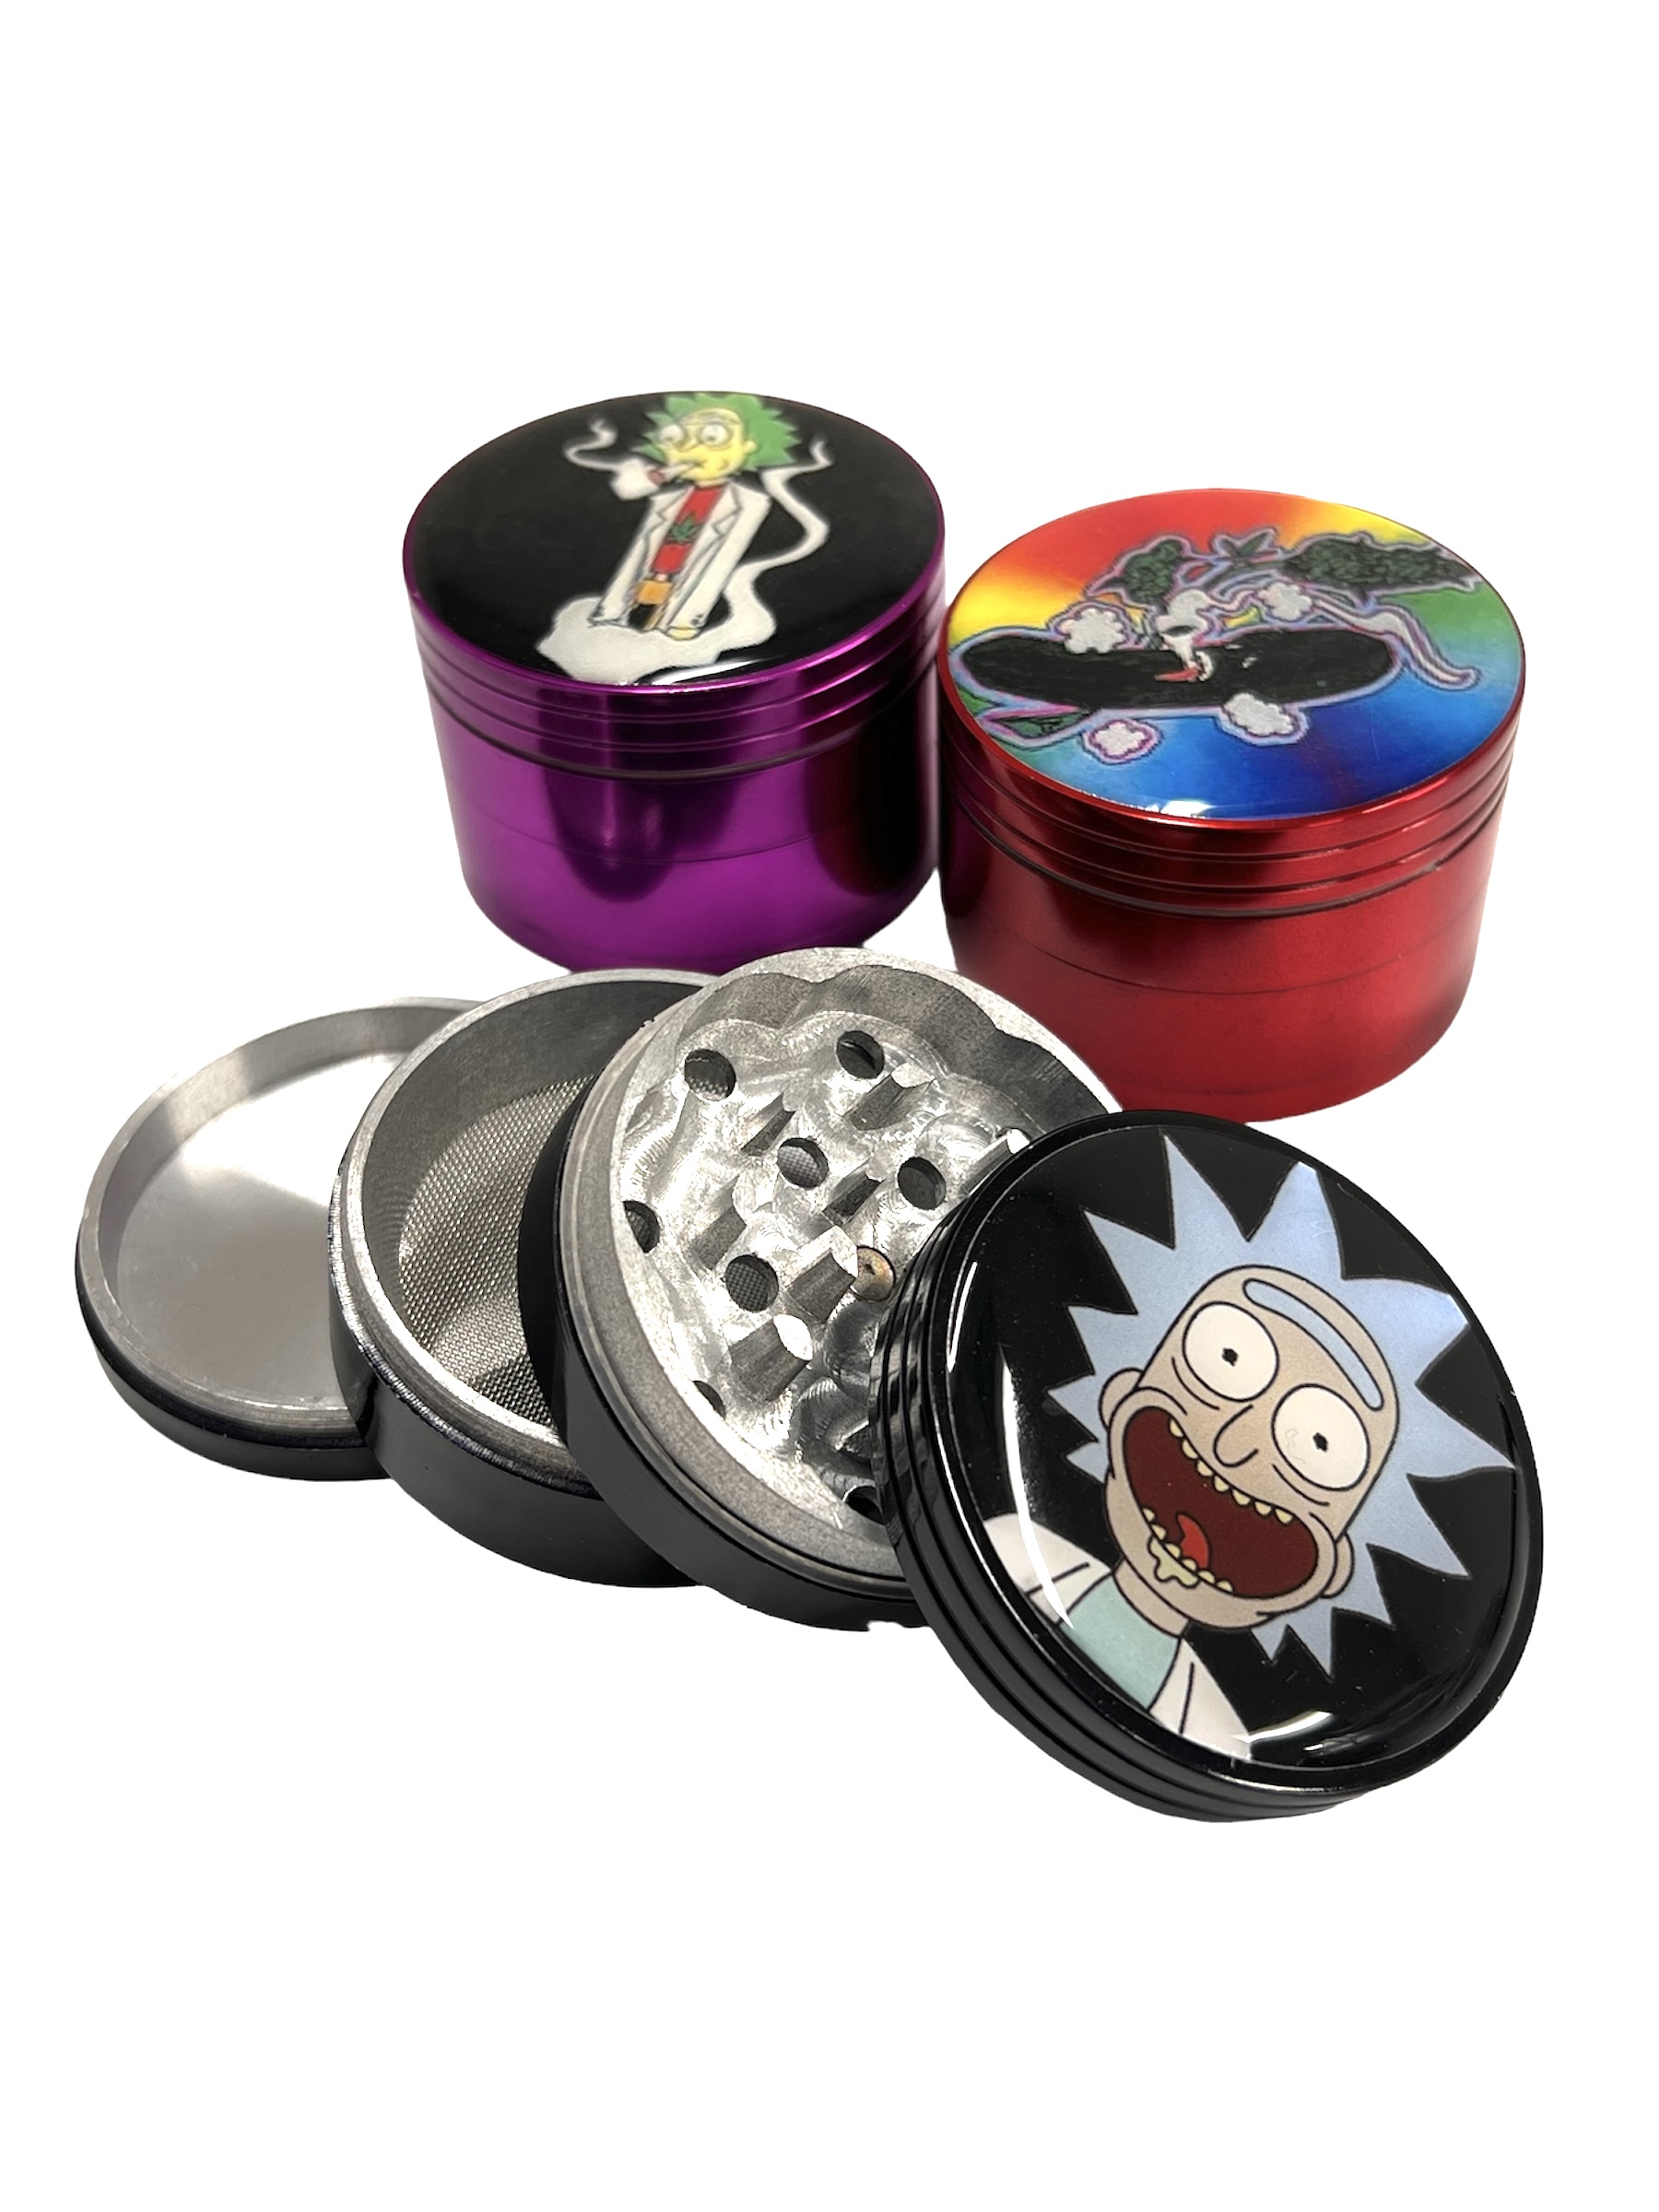 Metal Grinder 4parts 50mm Alien Rainbow x 12pcs [GRM15] : Multi-i -  Wholesale and distribution for herb grinders, grinder cards, pipes,  electronic smoking accessories, Cannabis seeds